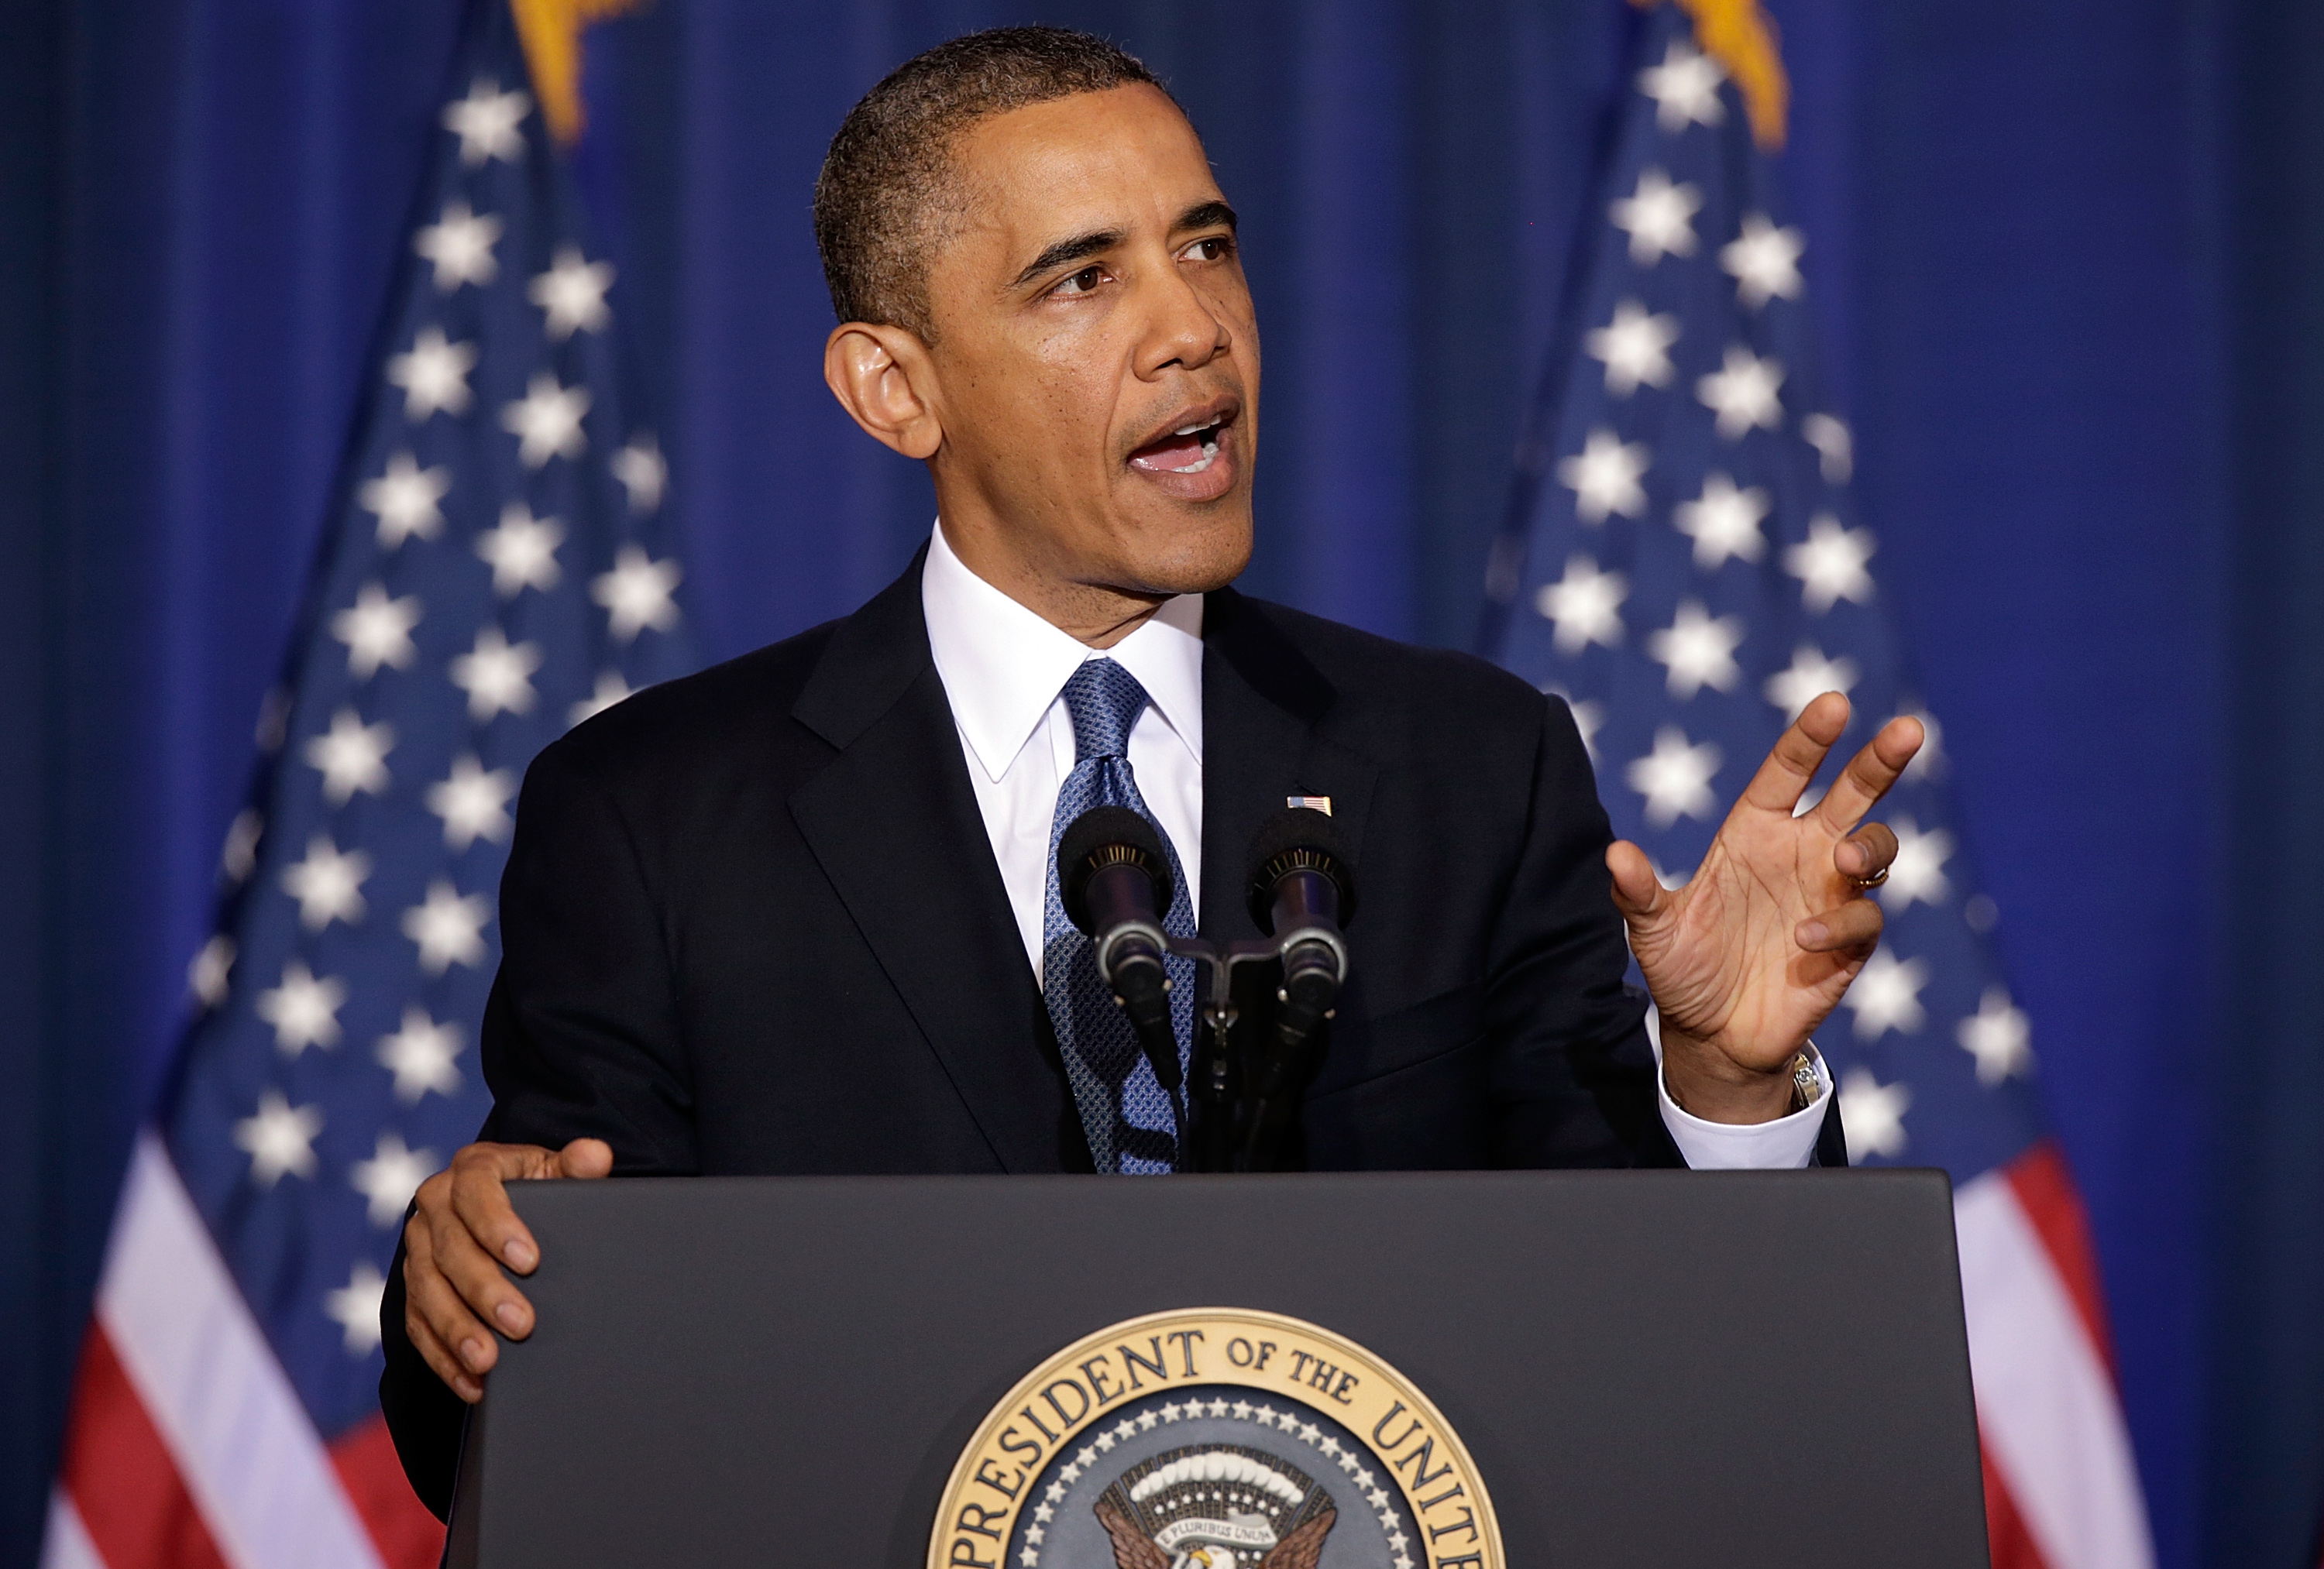 Obama Discusses US Counterterrorism Policy At National Defense University